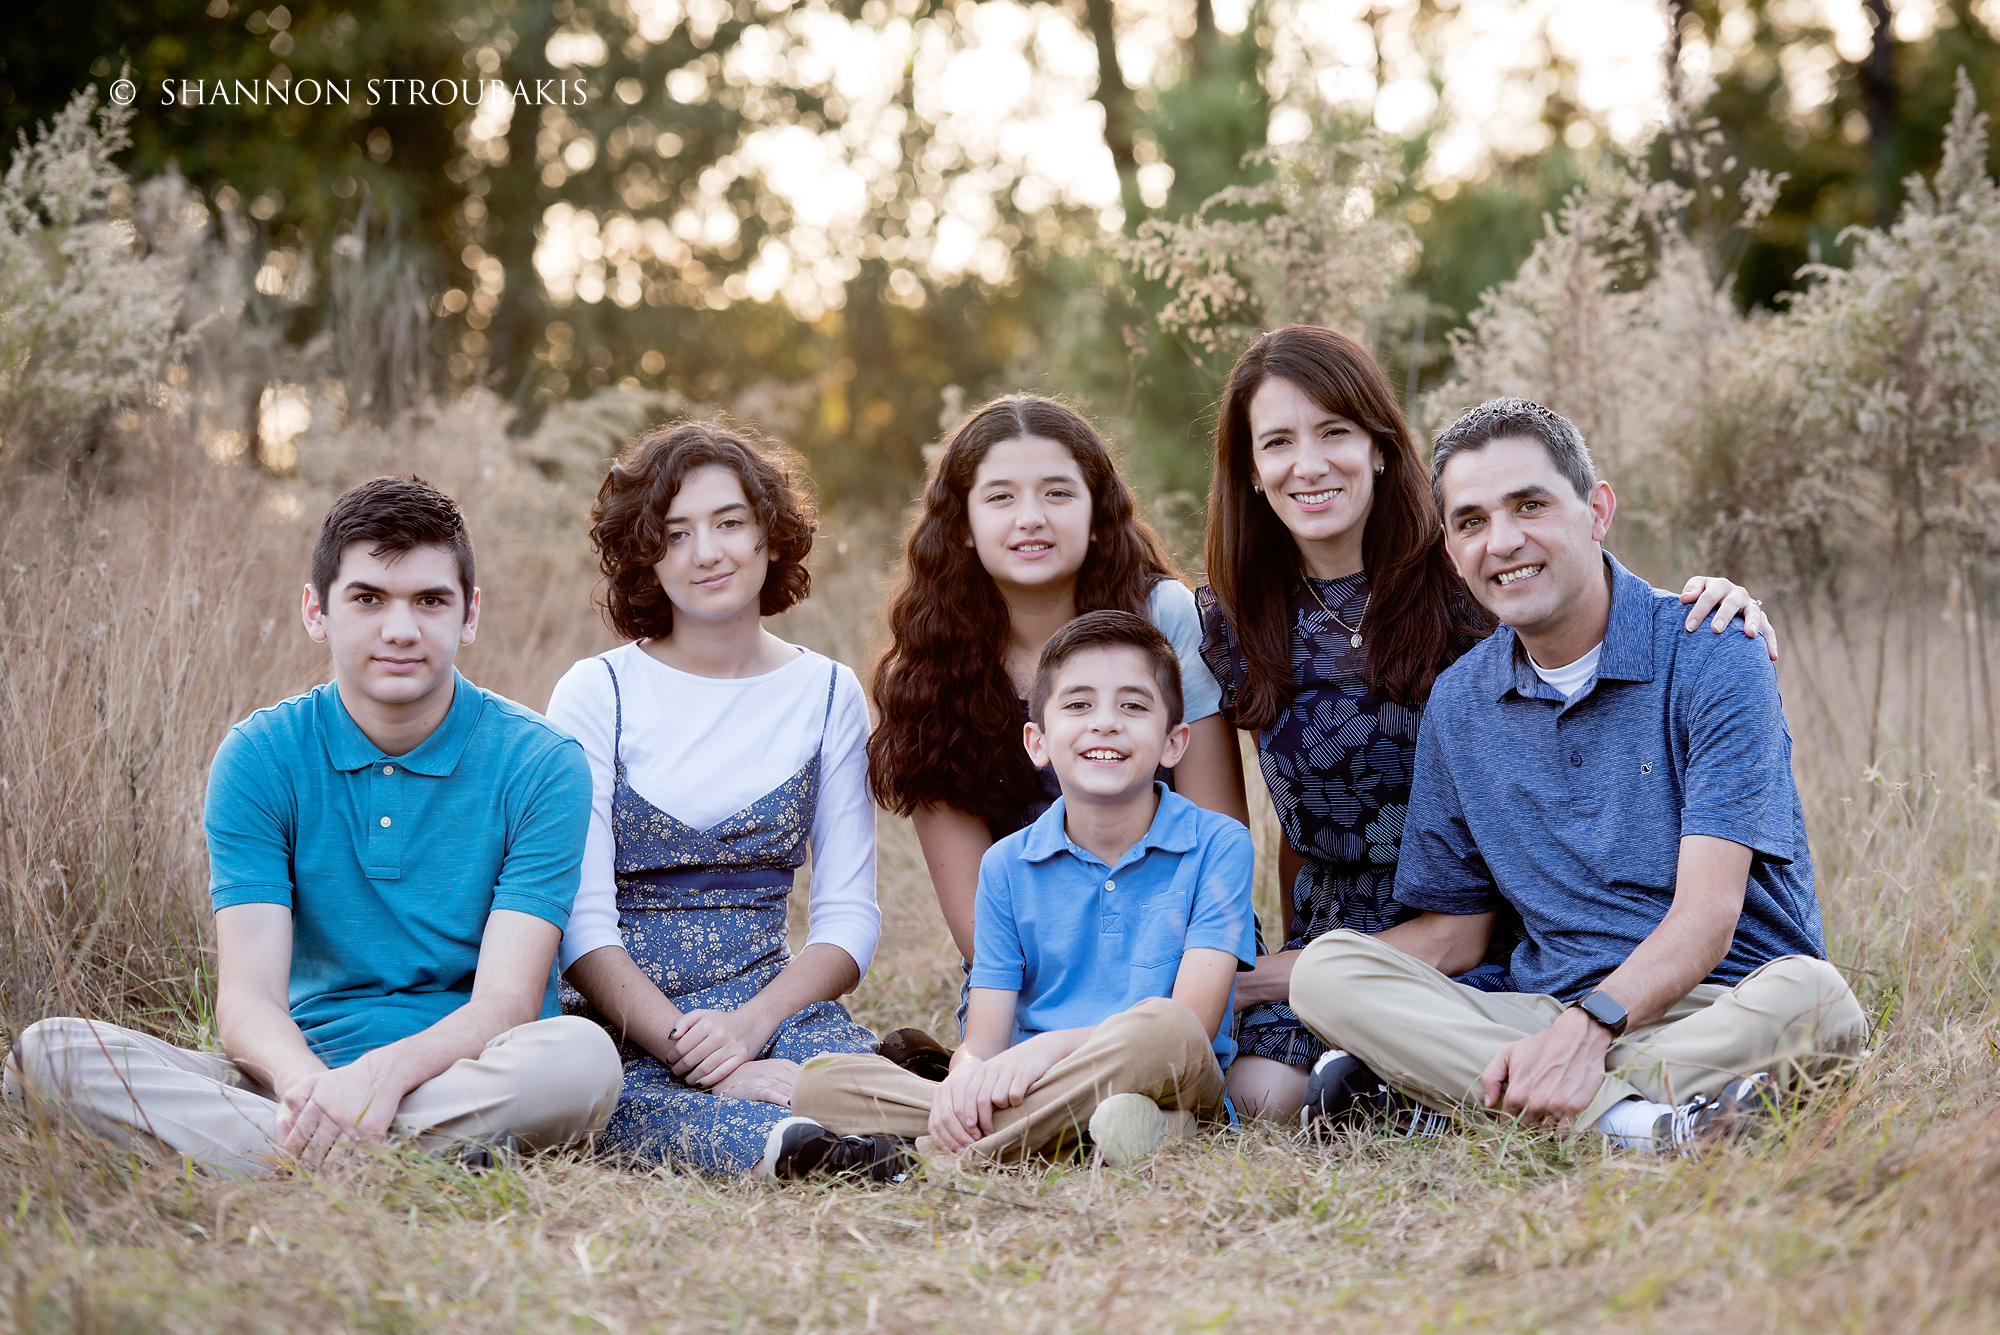 family of four photo ideas | Photography poses family, Family portrait poses,  Family picture poses